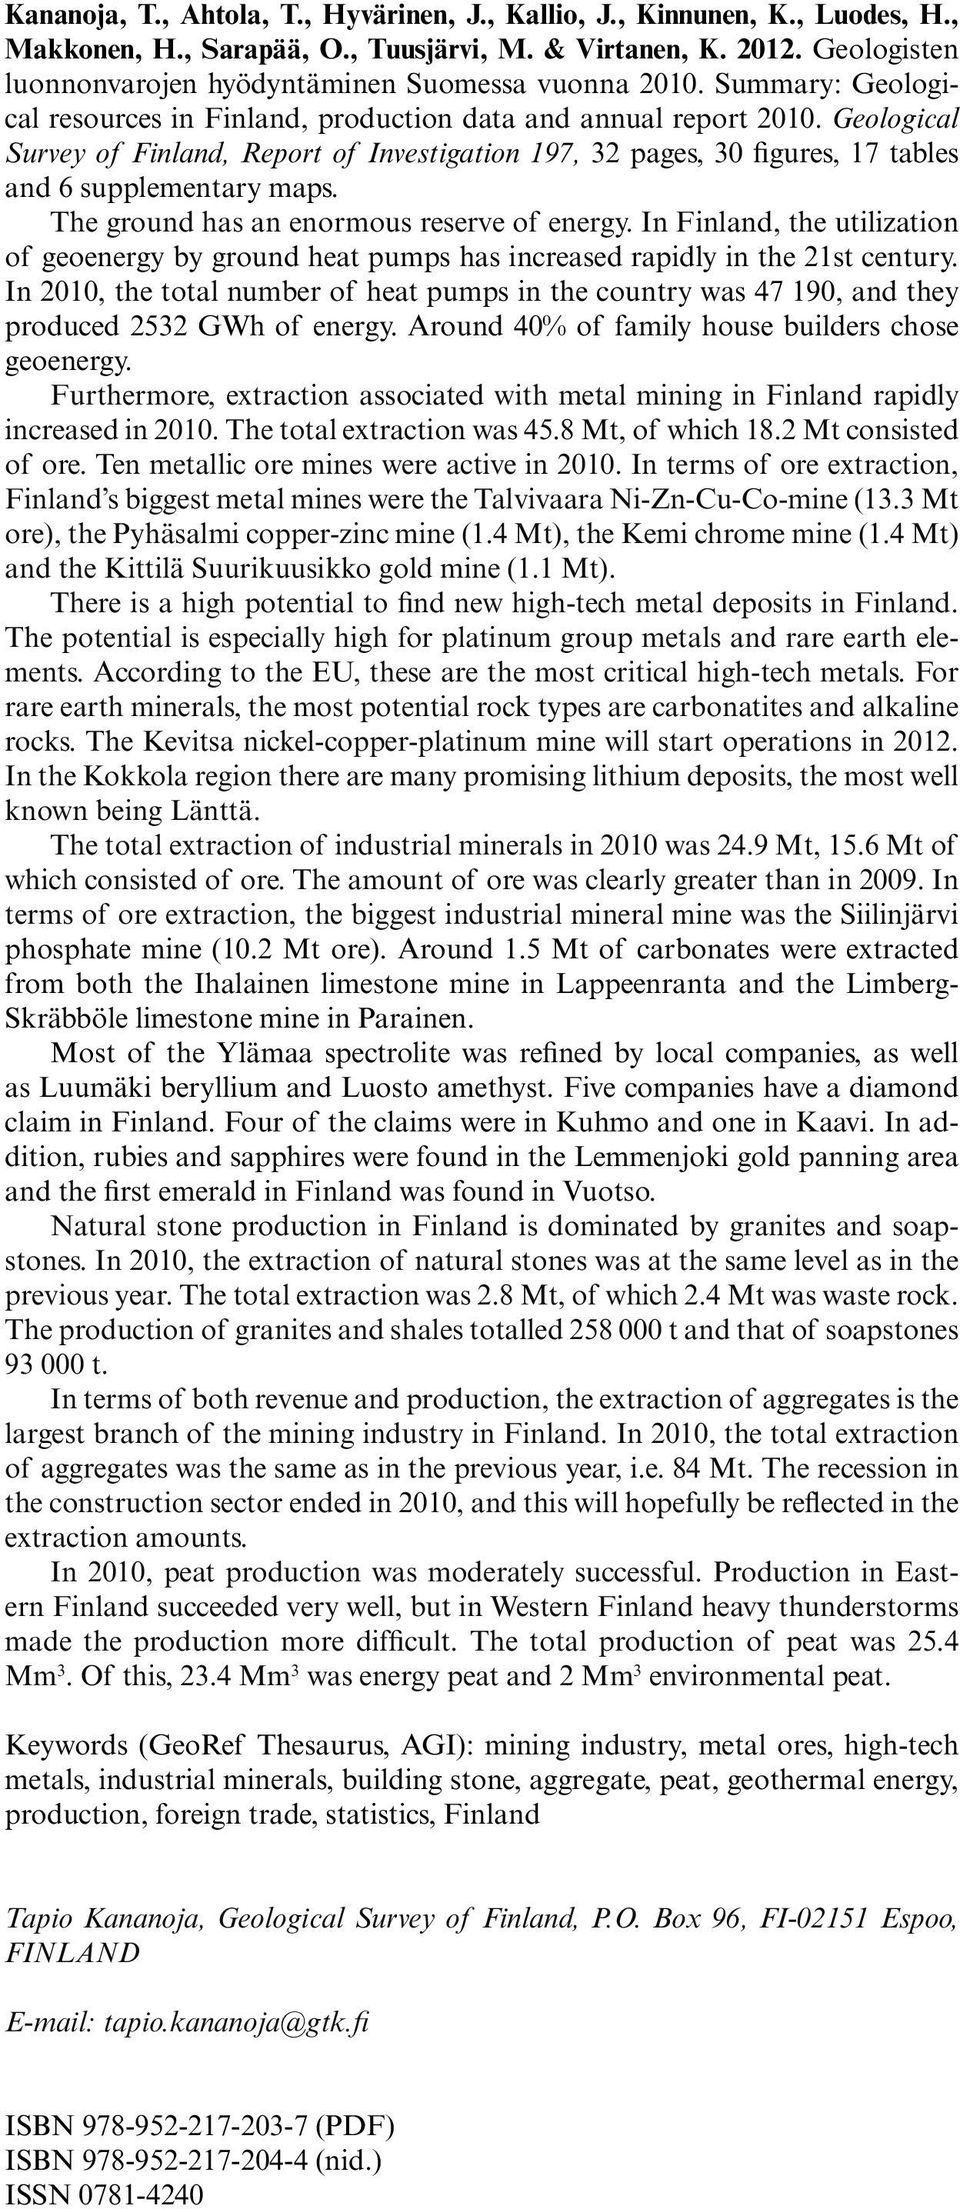 Geological Survey of Finland, Report of Investigation 197, 32 pages, 30 figures, 17 tables and 6 supplementary maps. The ground has an enormous reserve of energy.